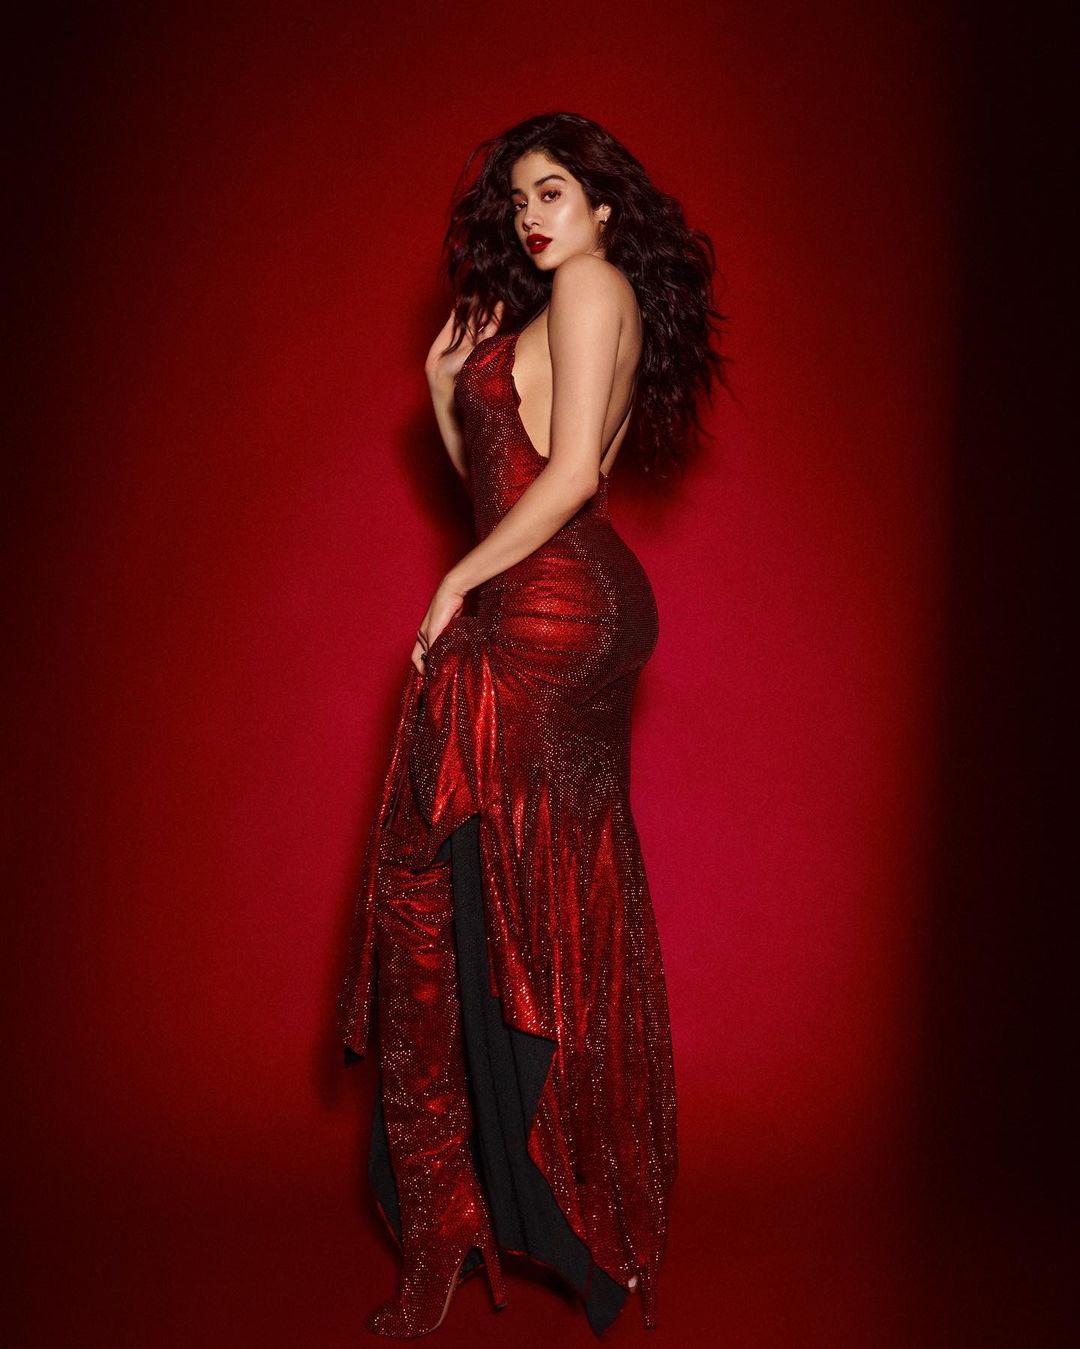 Janhvi Kapoor sparkles in glittery backless red flared gown, Arjun Kapoor says “time to make merry” | IWMBuzz